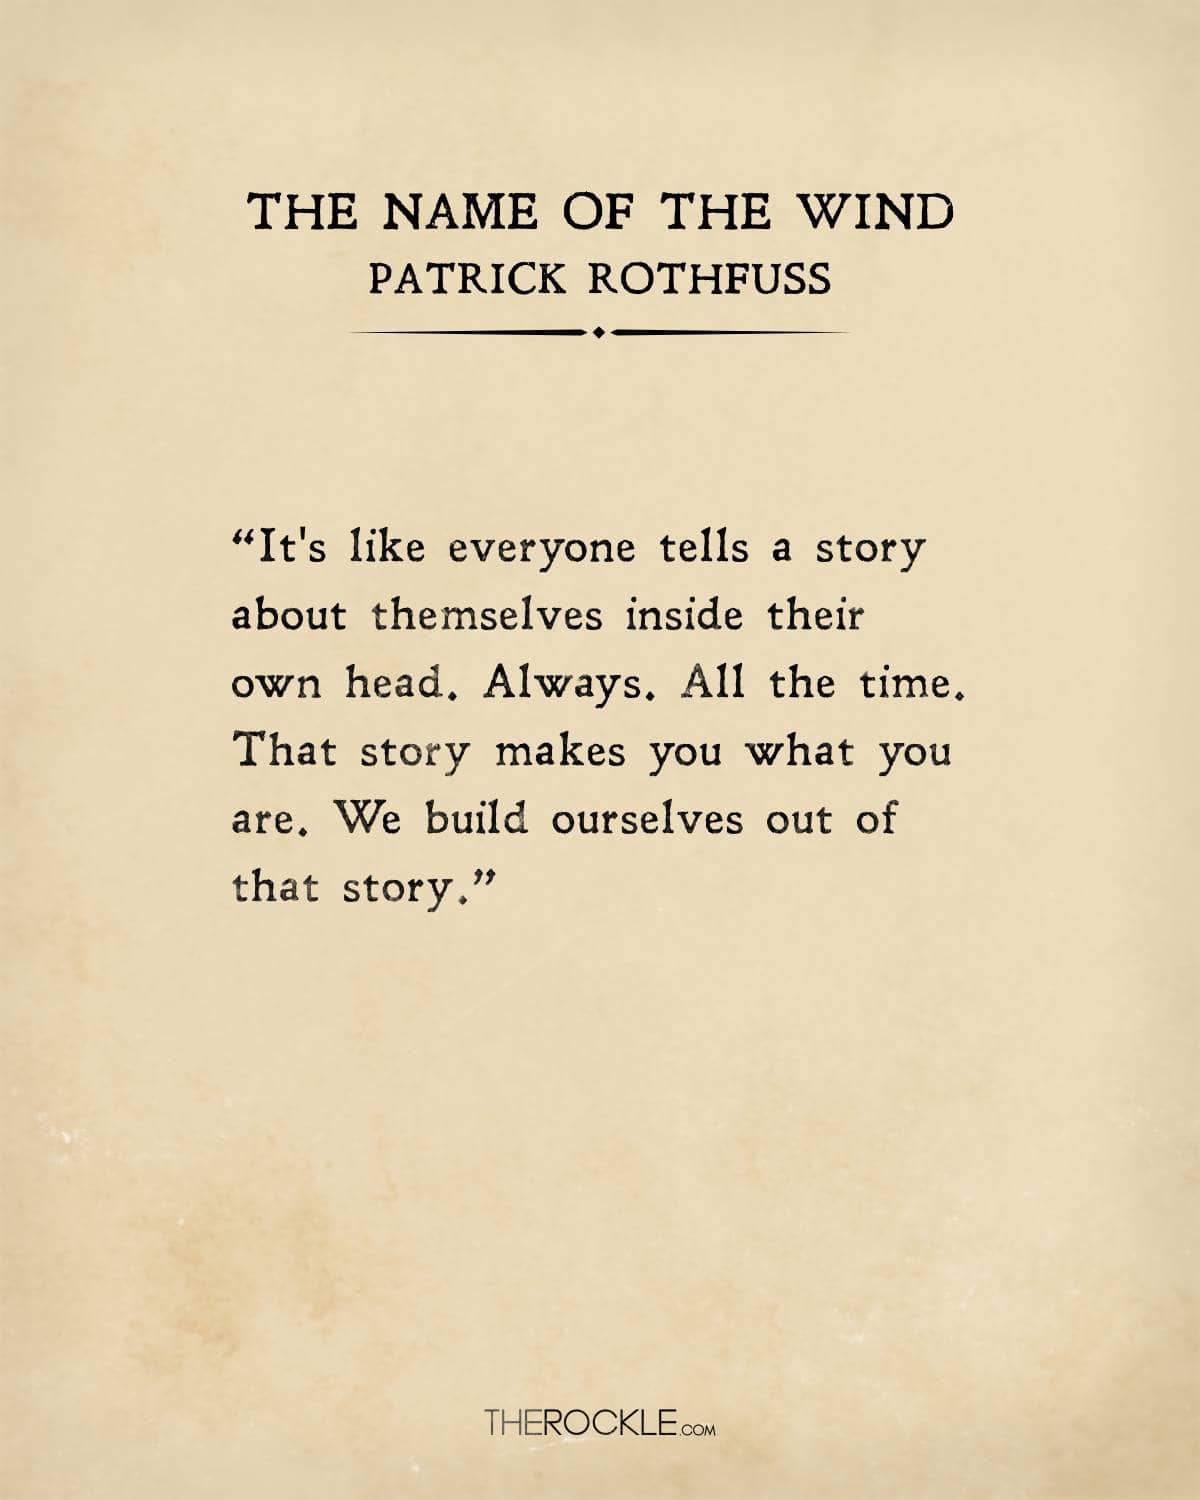 Patrick Rothfuss on people and stories